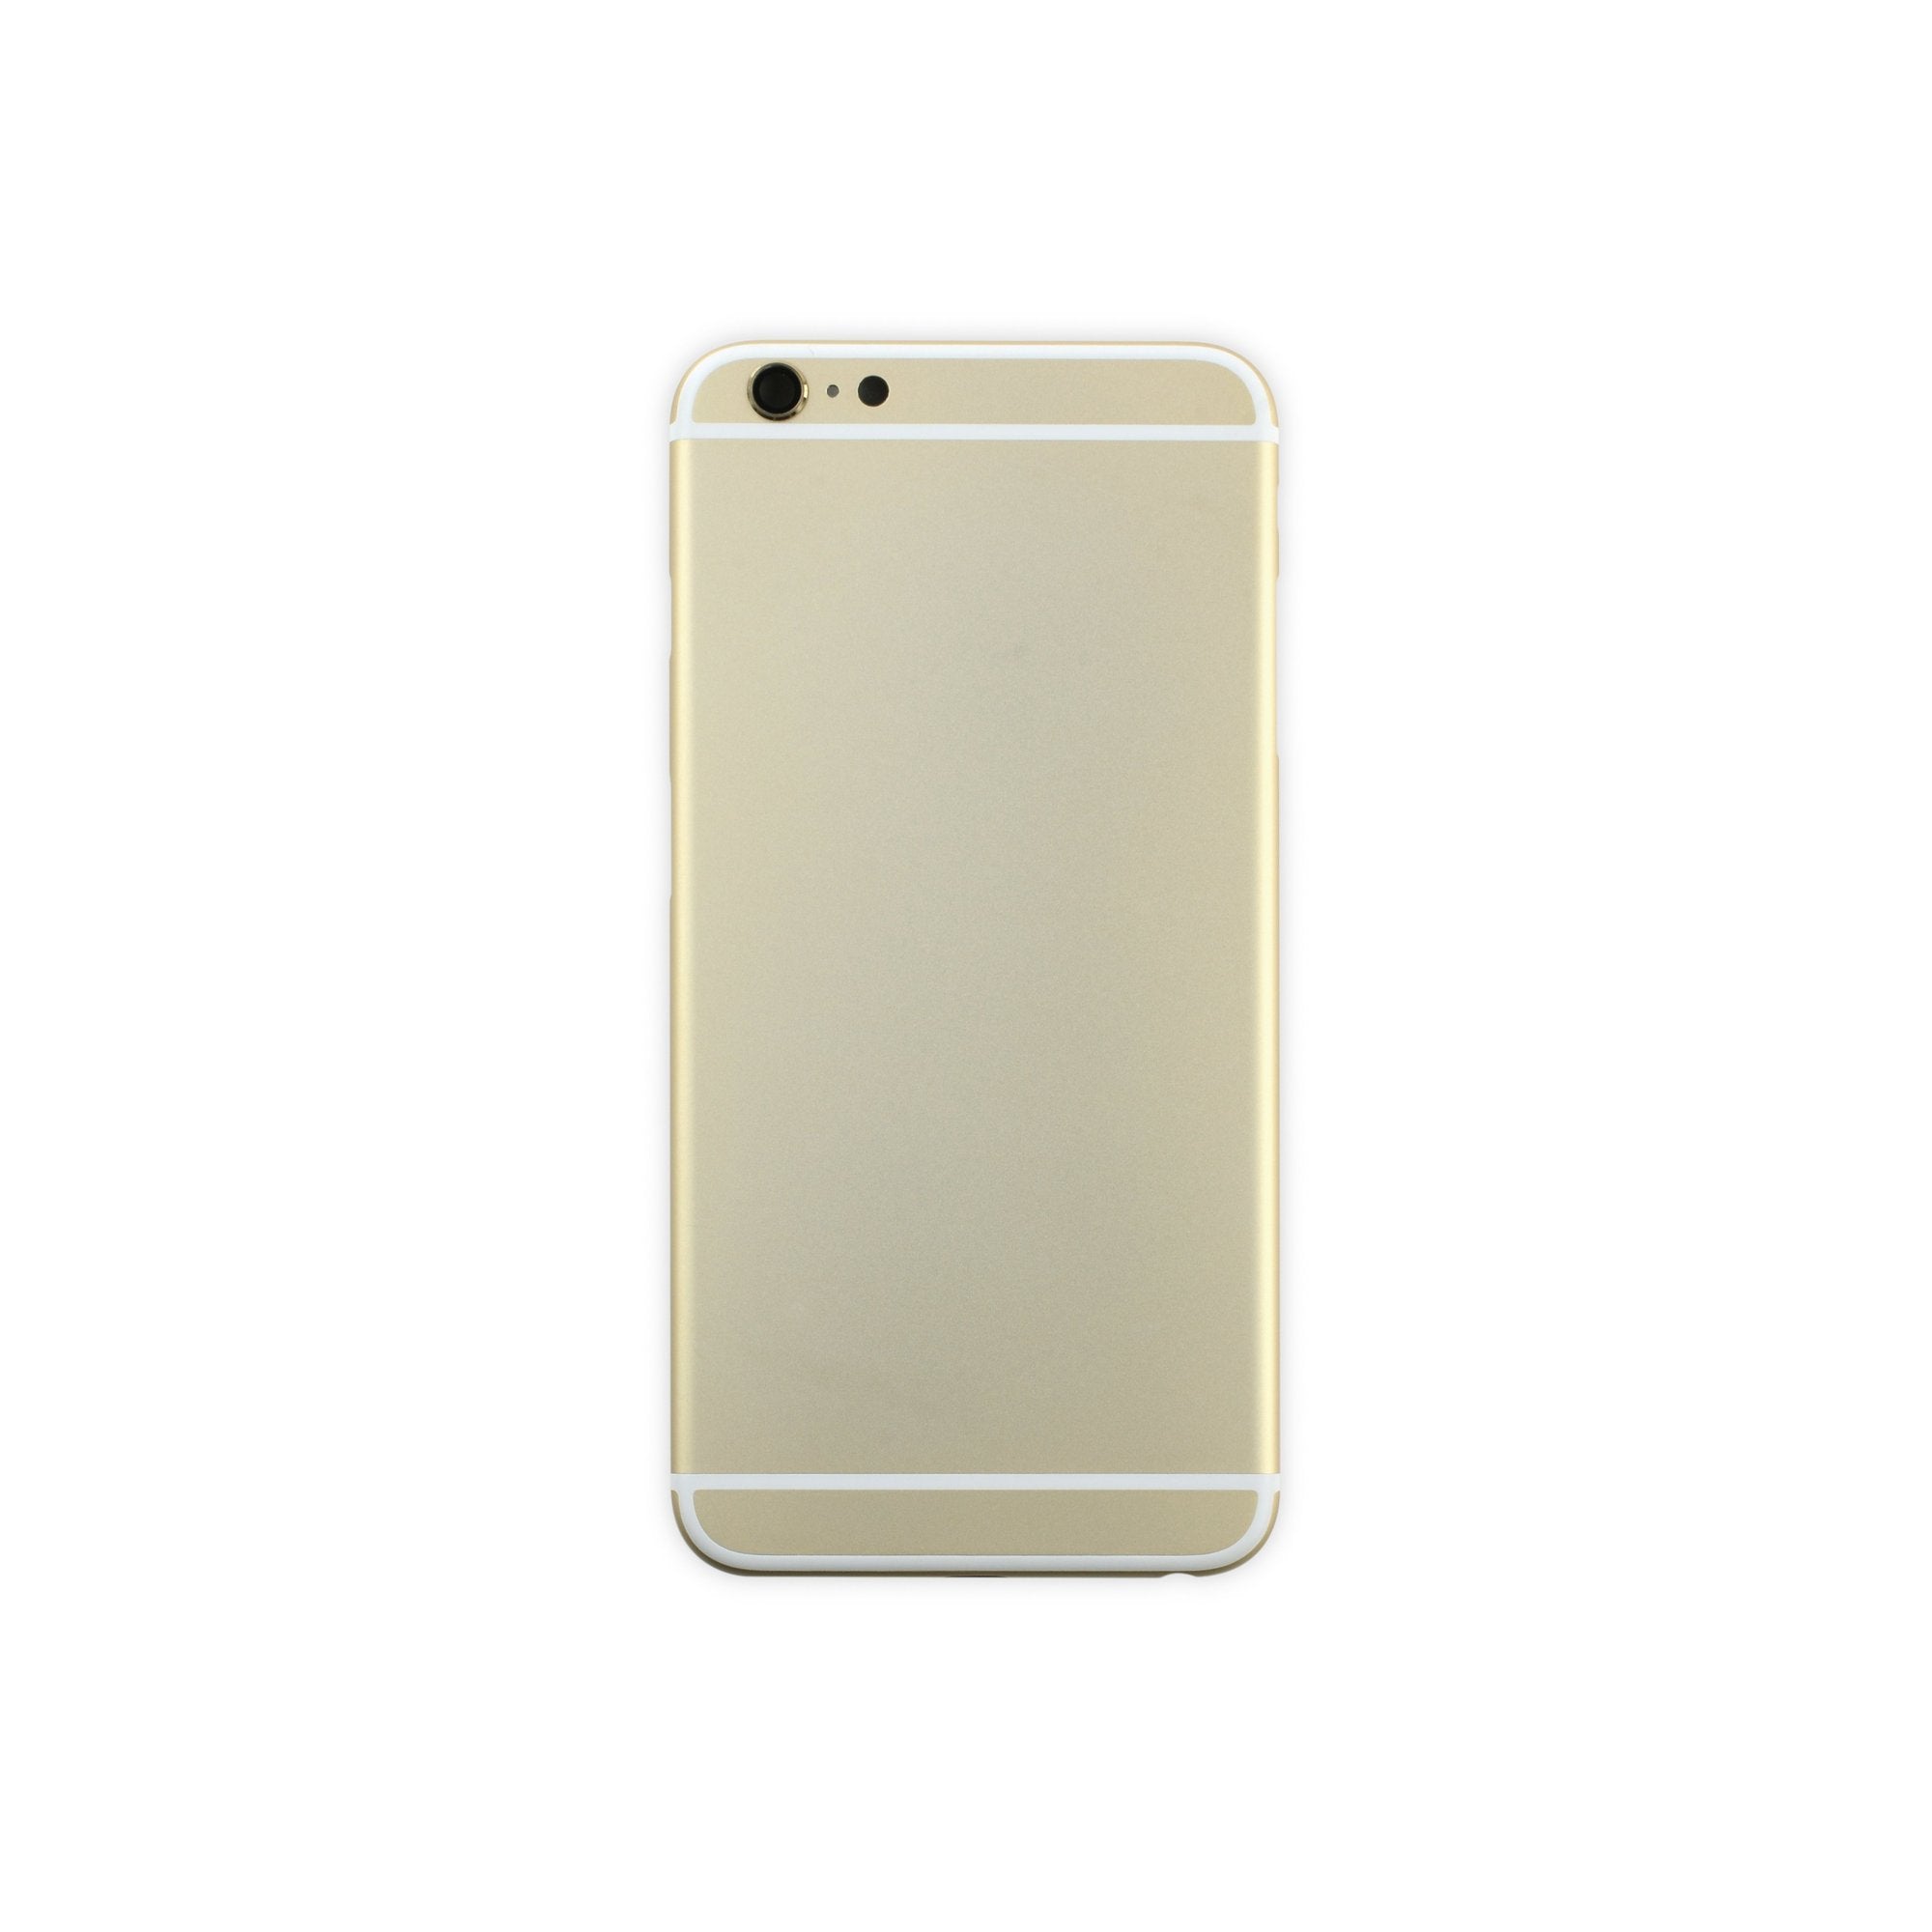 iPhone 6 Plus Blank Rear Case Gold New